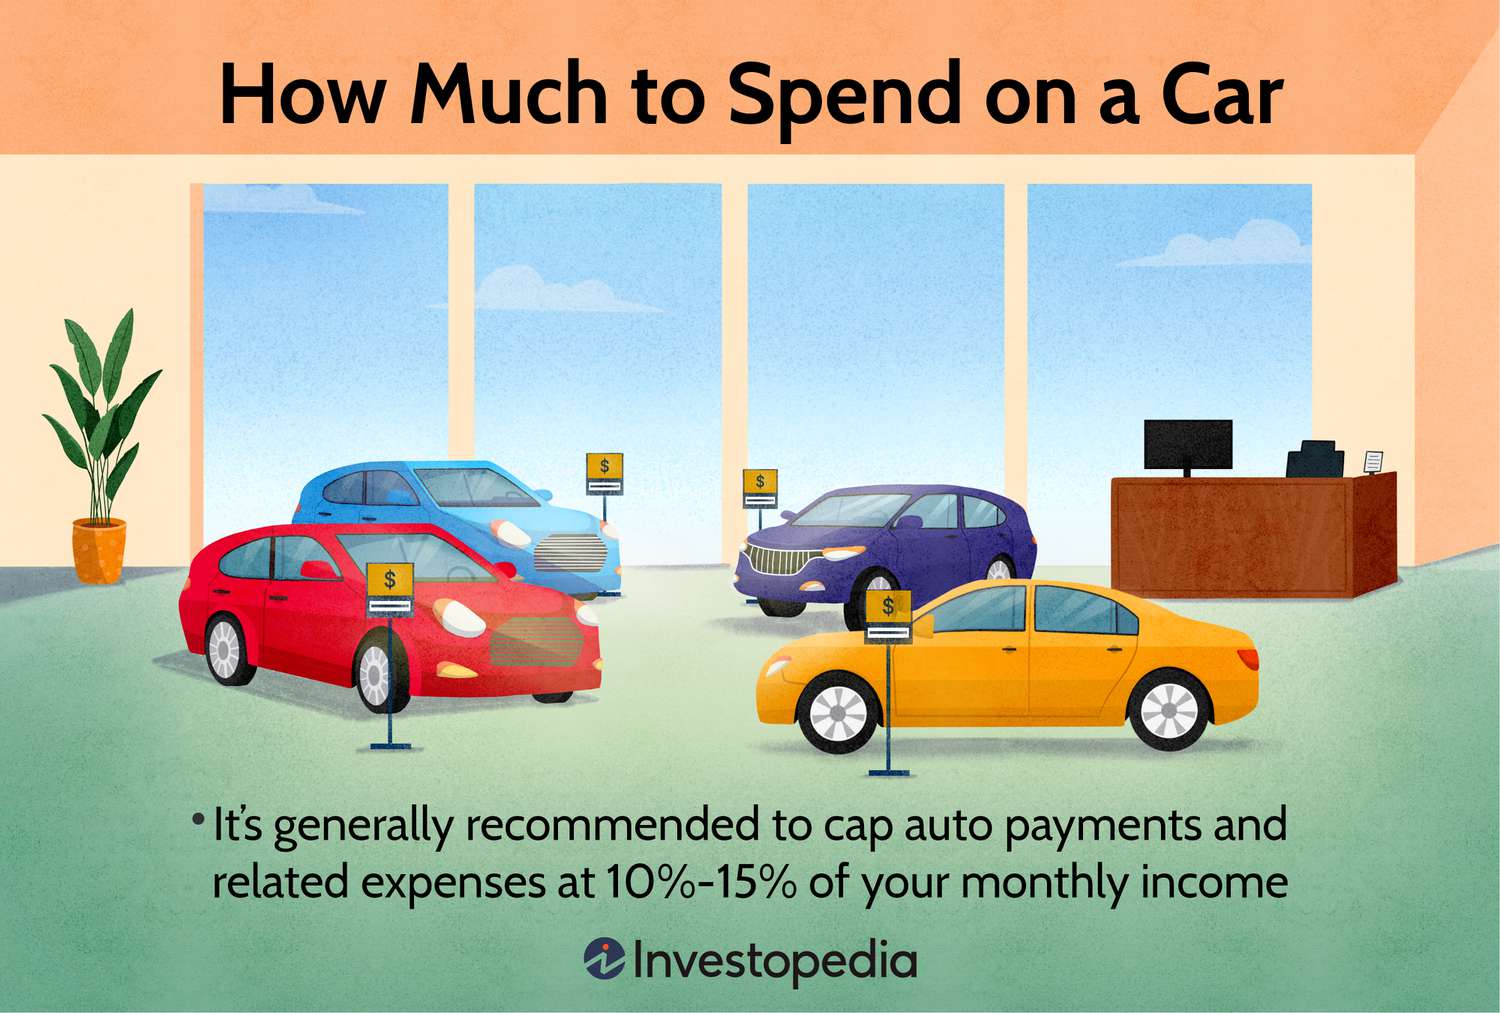 Car Finance Vehicles: Smart Strategies to Own Your Dream Ride